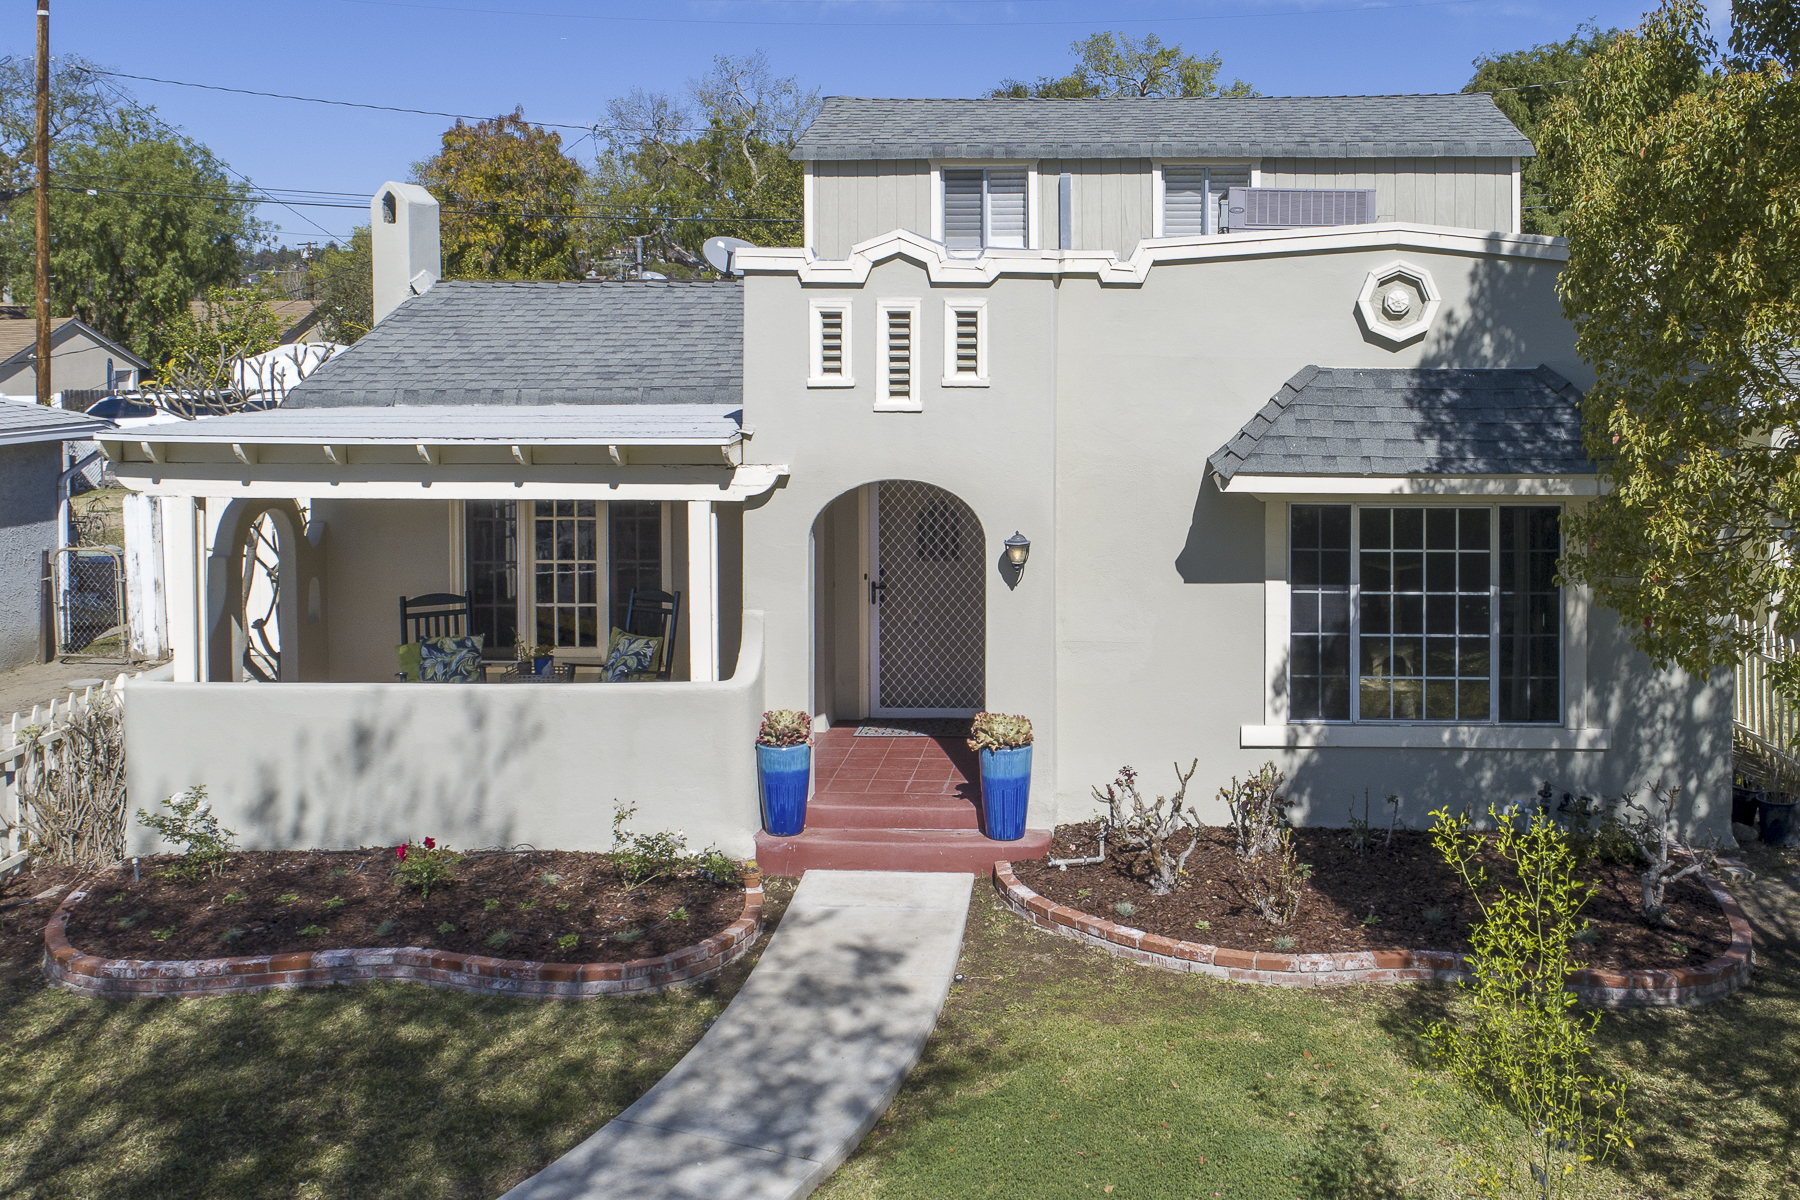 1229 Grove Place Fullerton CA 92831: Front of house face on